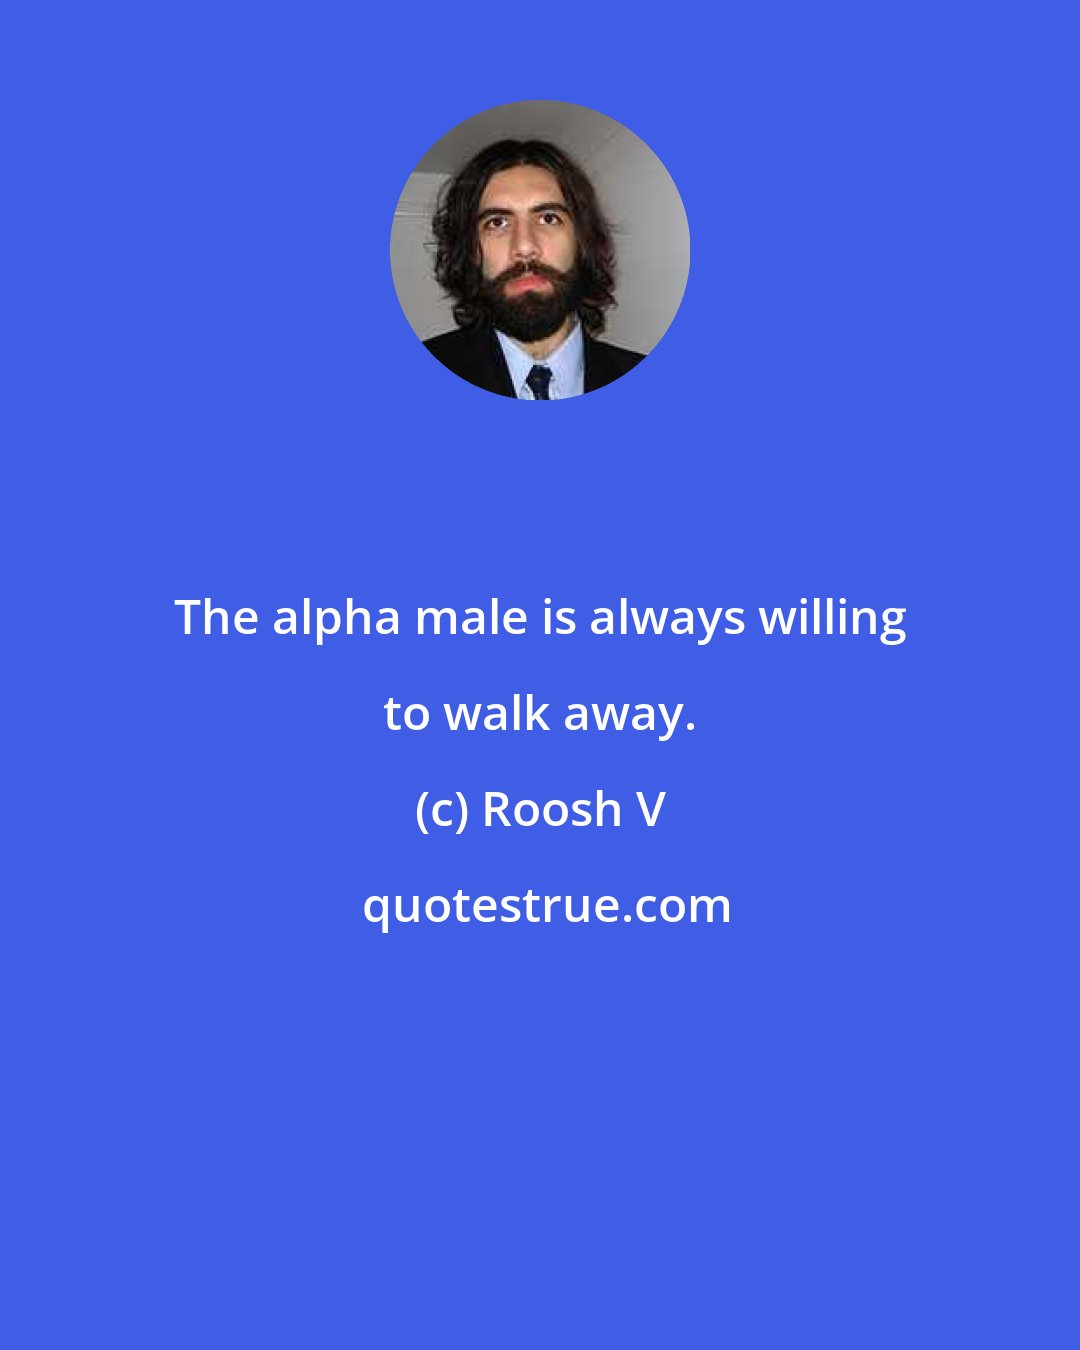 Roosh V: The alpha male is always willing to walk away.